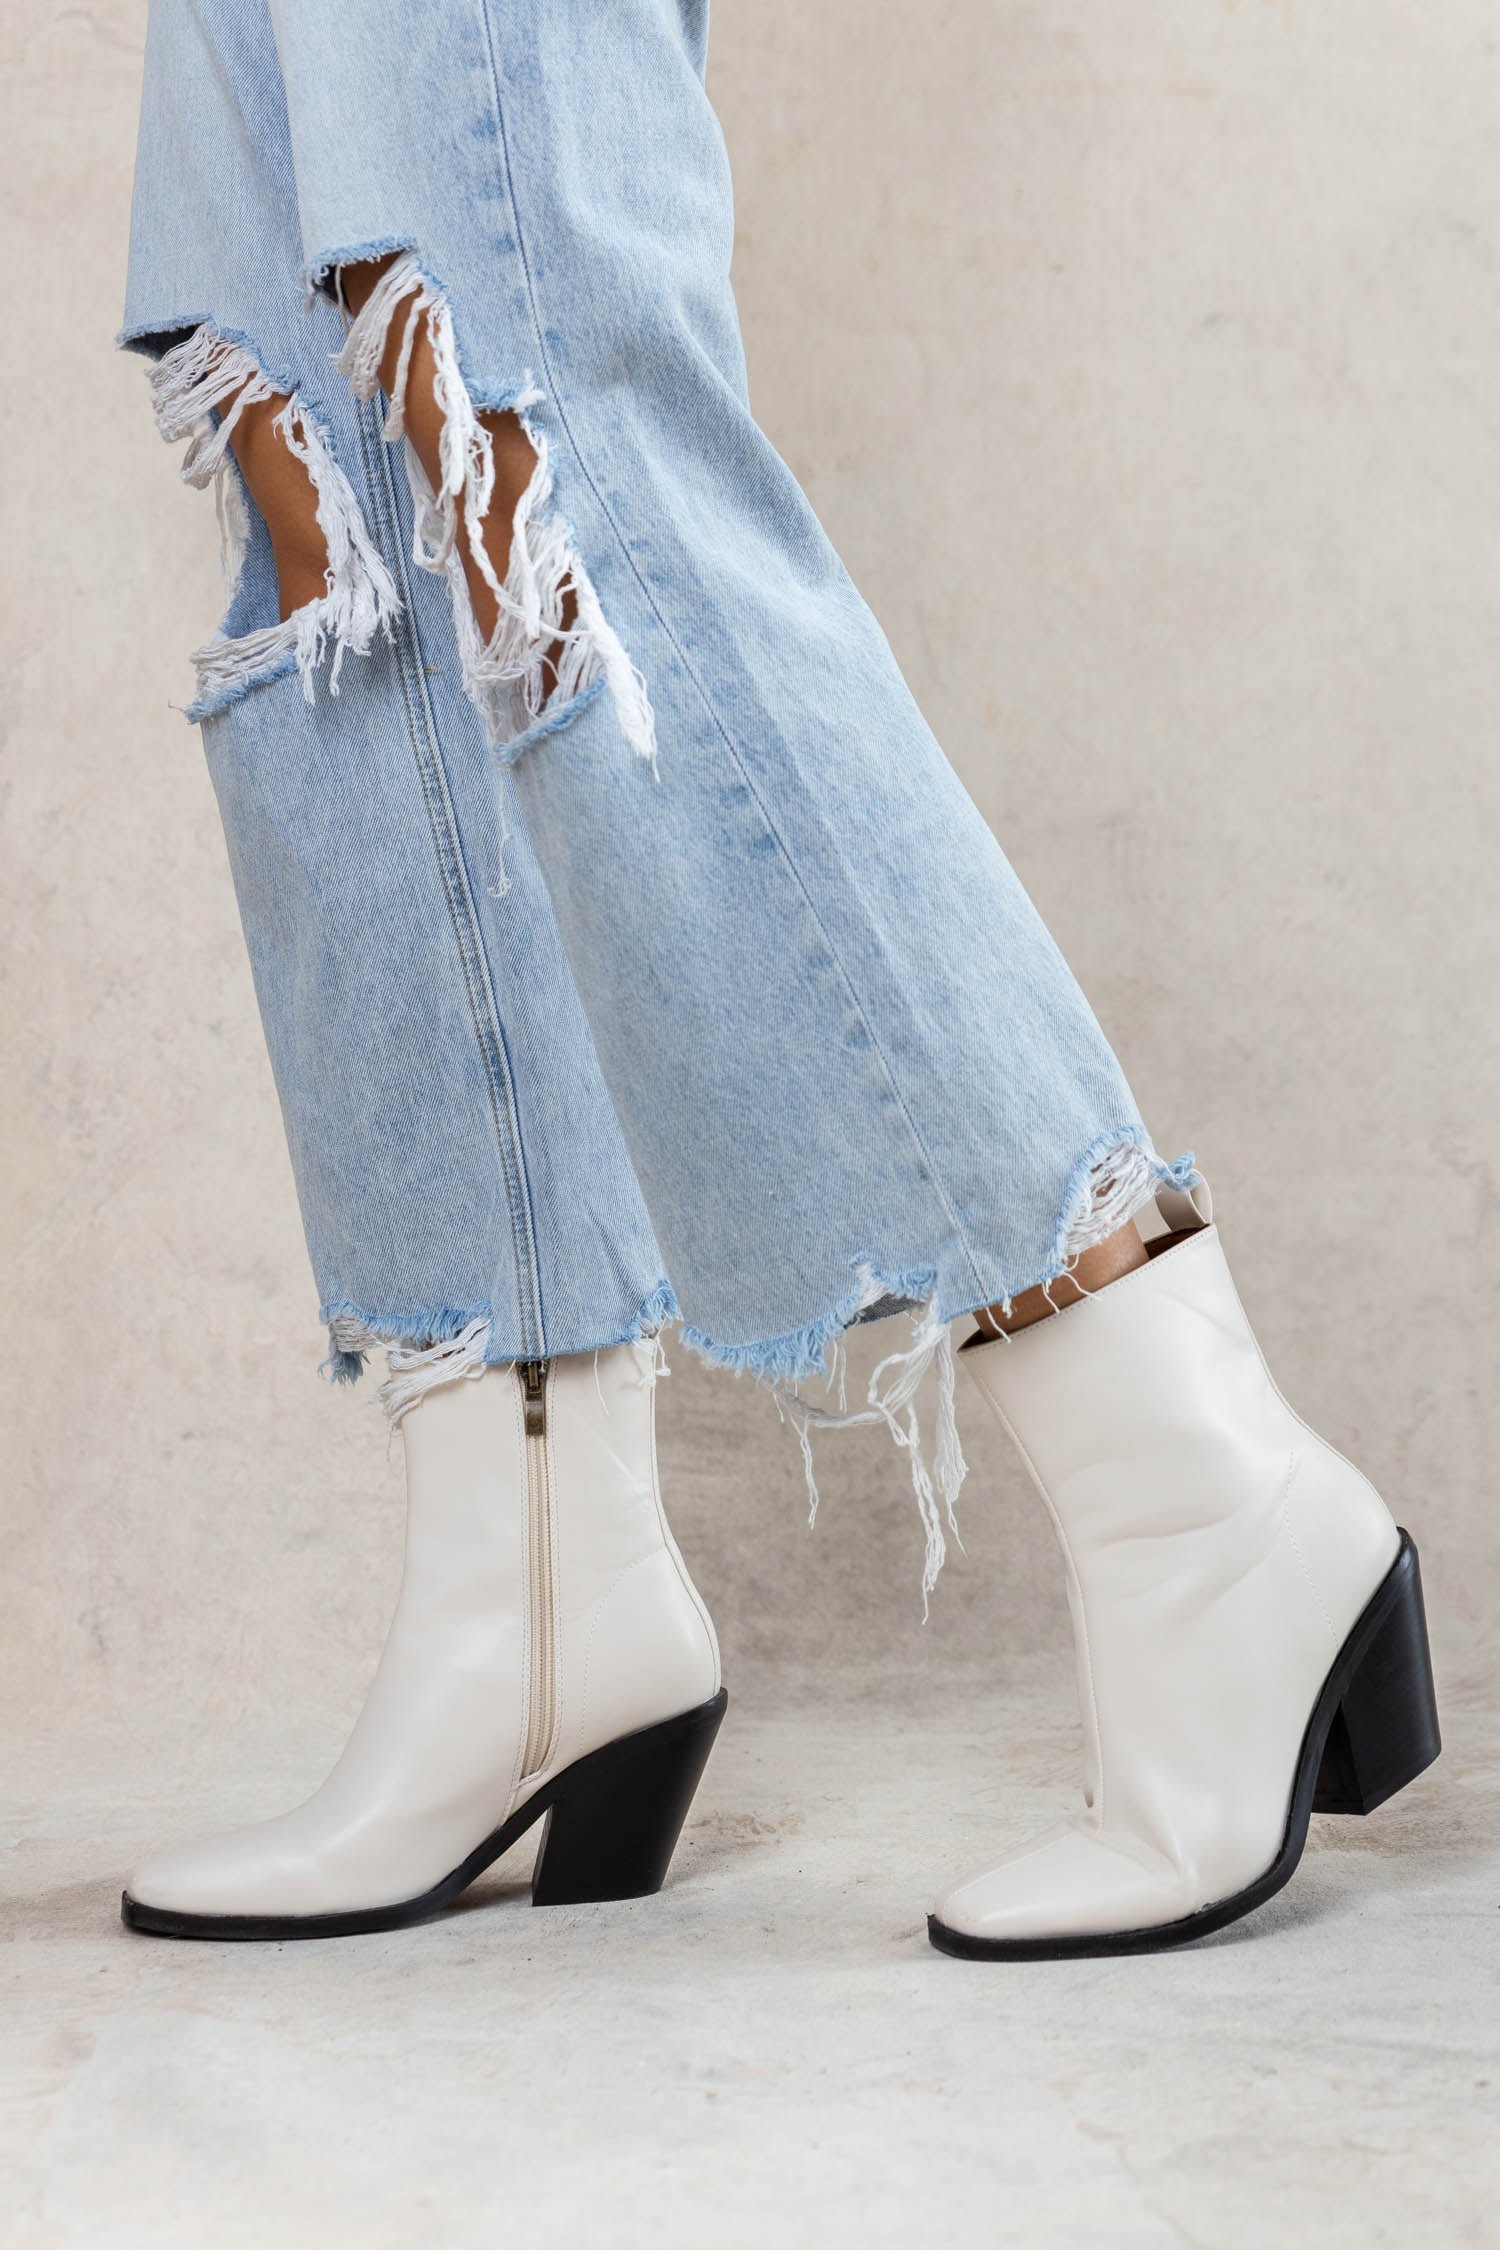 Image of Bronda Heeled Boots in Ivory - FINAL SALE